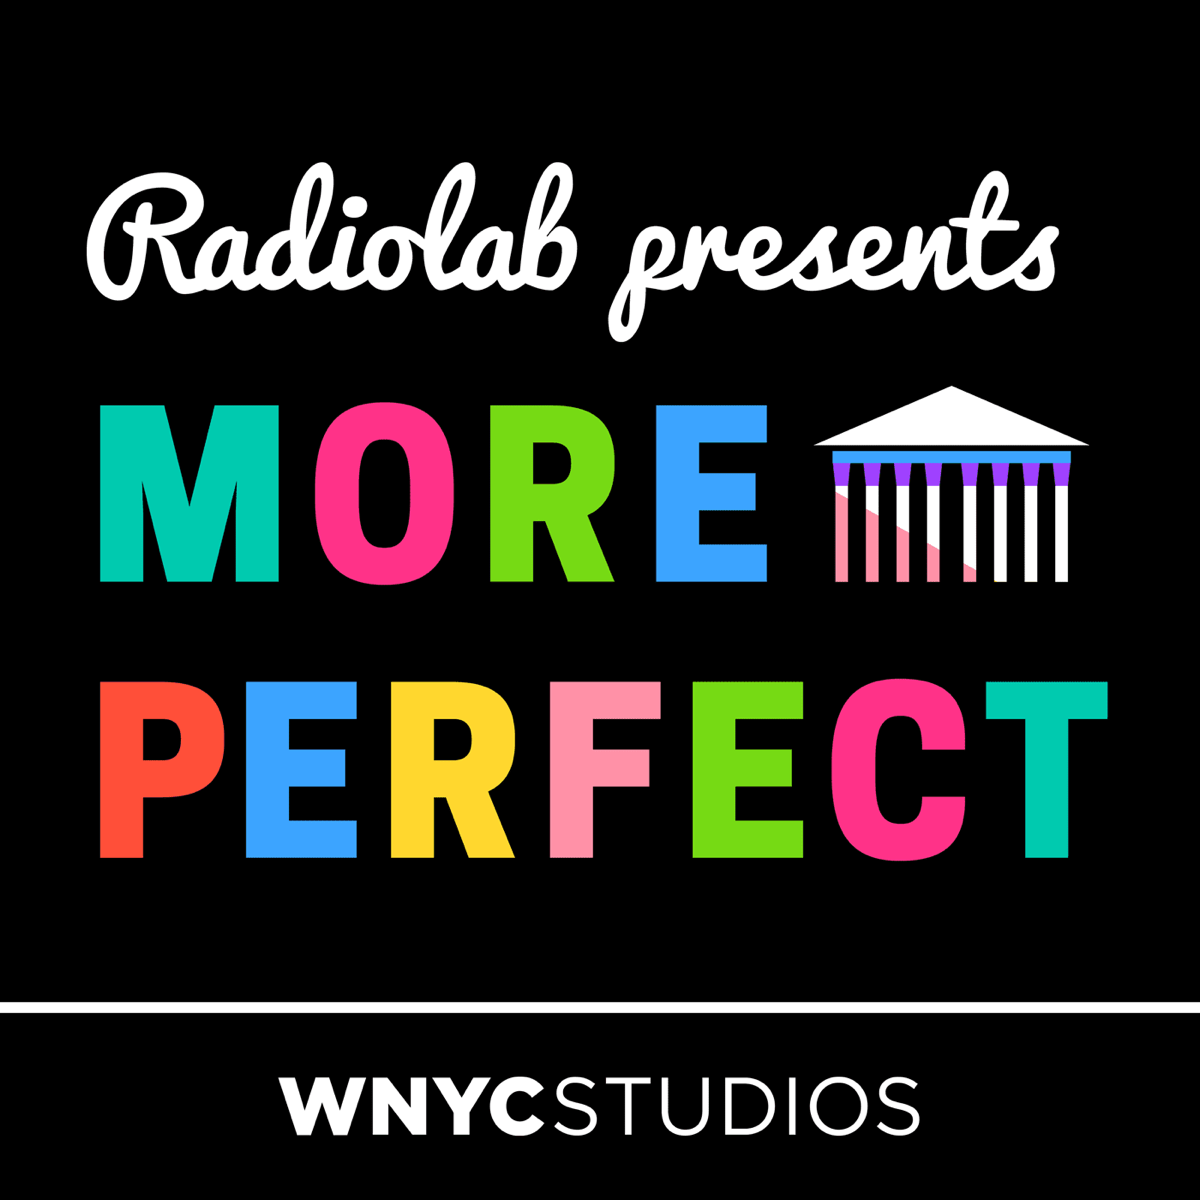 The 10 Best Radiolab Presents More Perfect Podcast Episodes Podyssey 